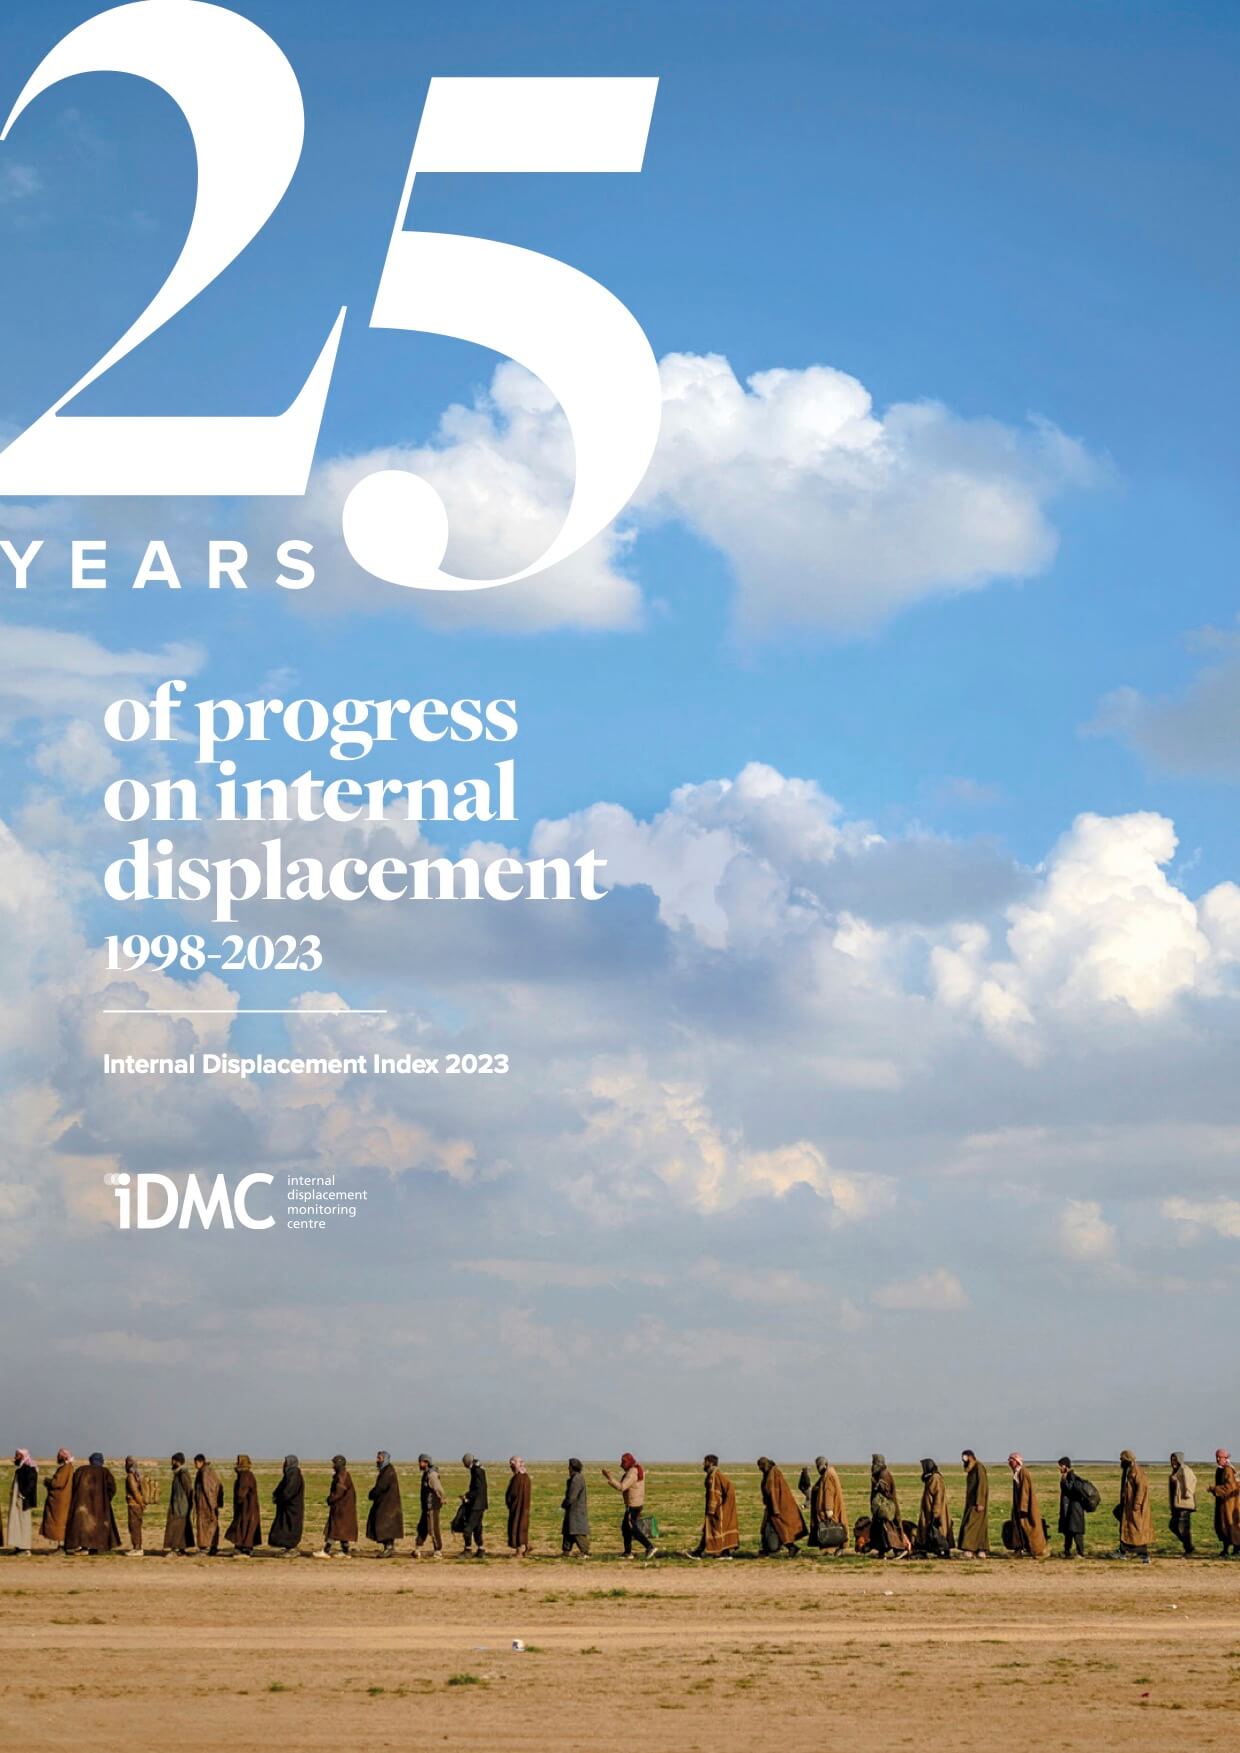 25 years of progress on internal displacement 1998-2023